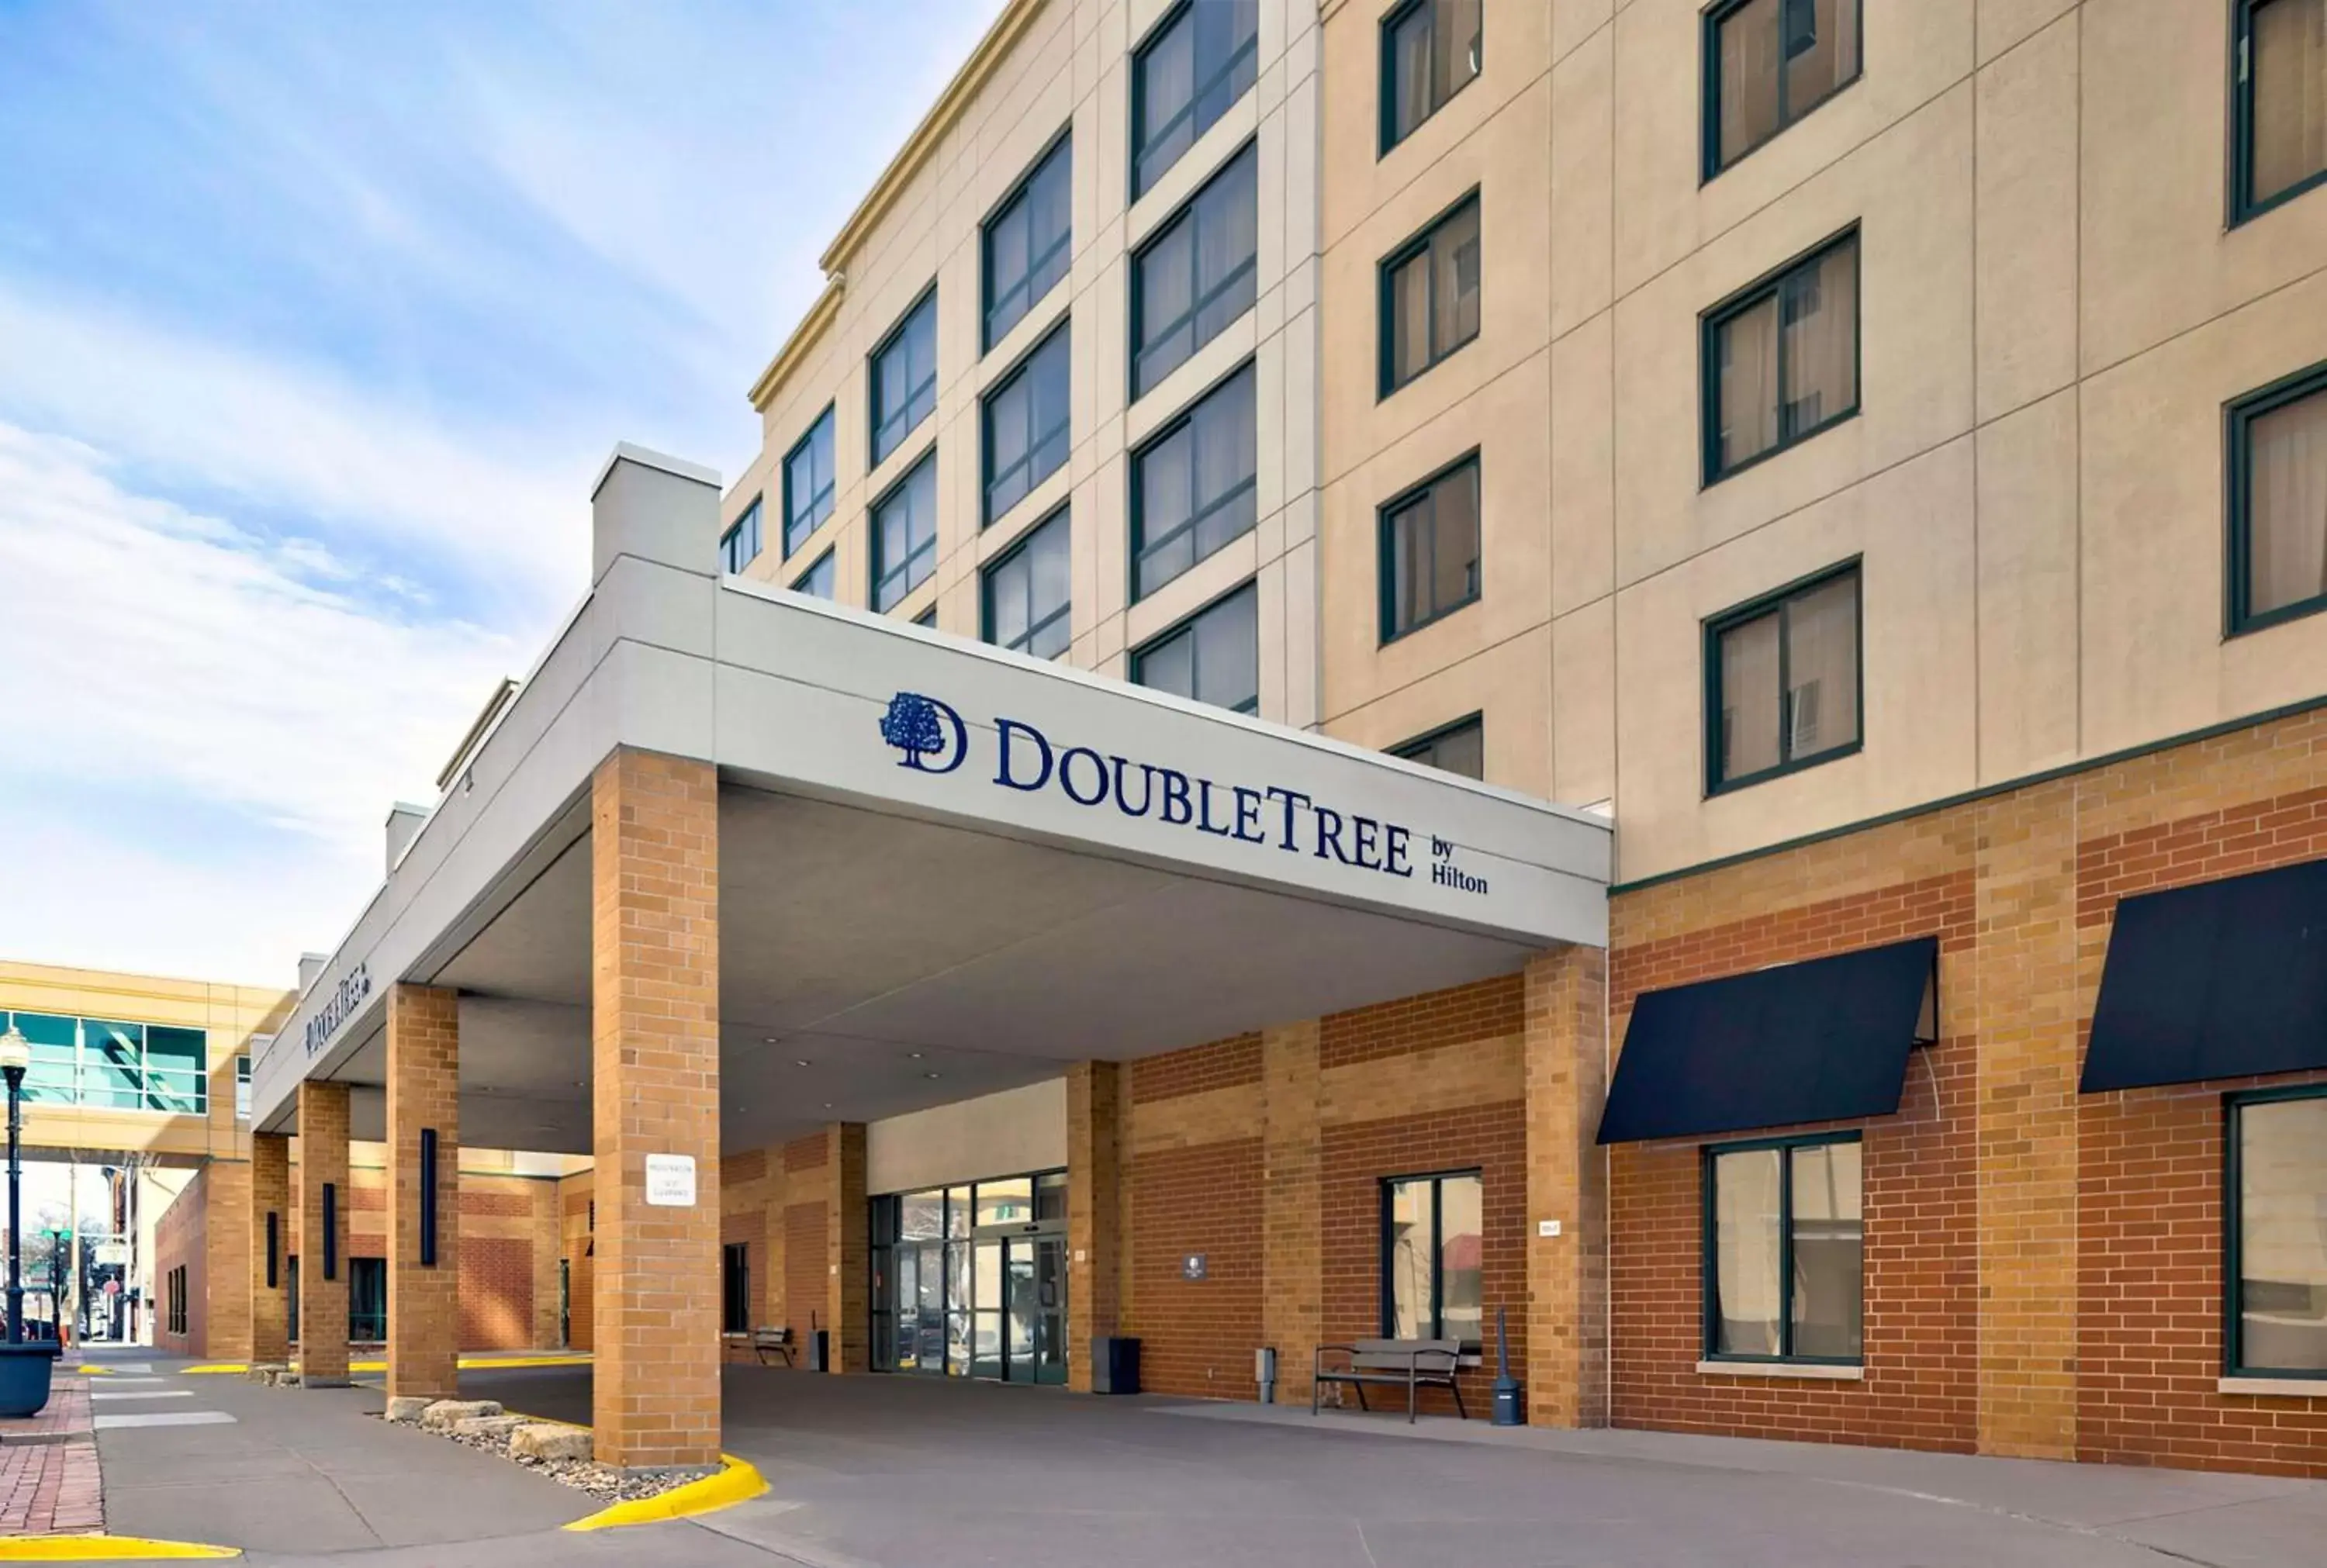 Property building in DoubleTree by Hilton Davenport